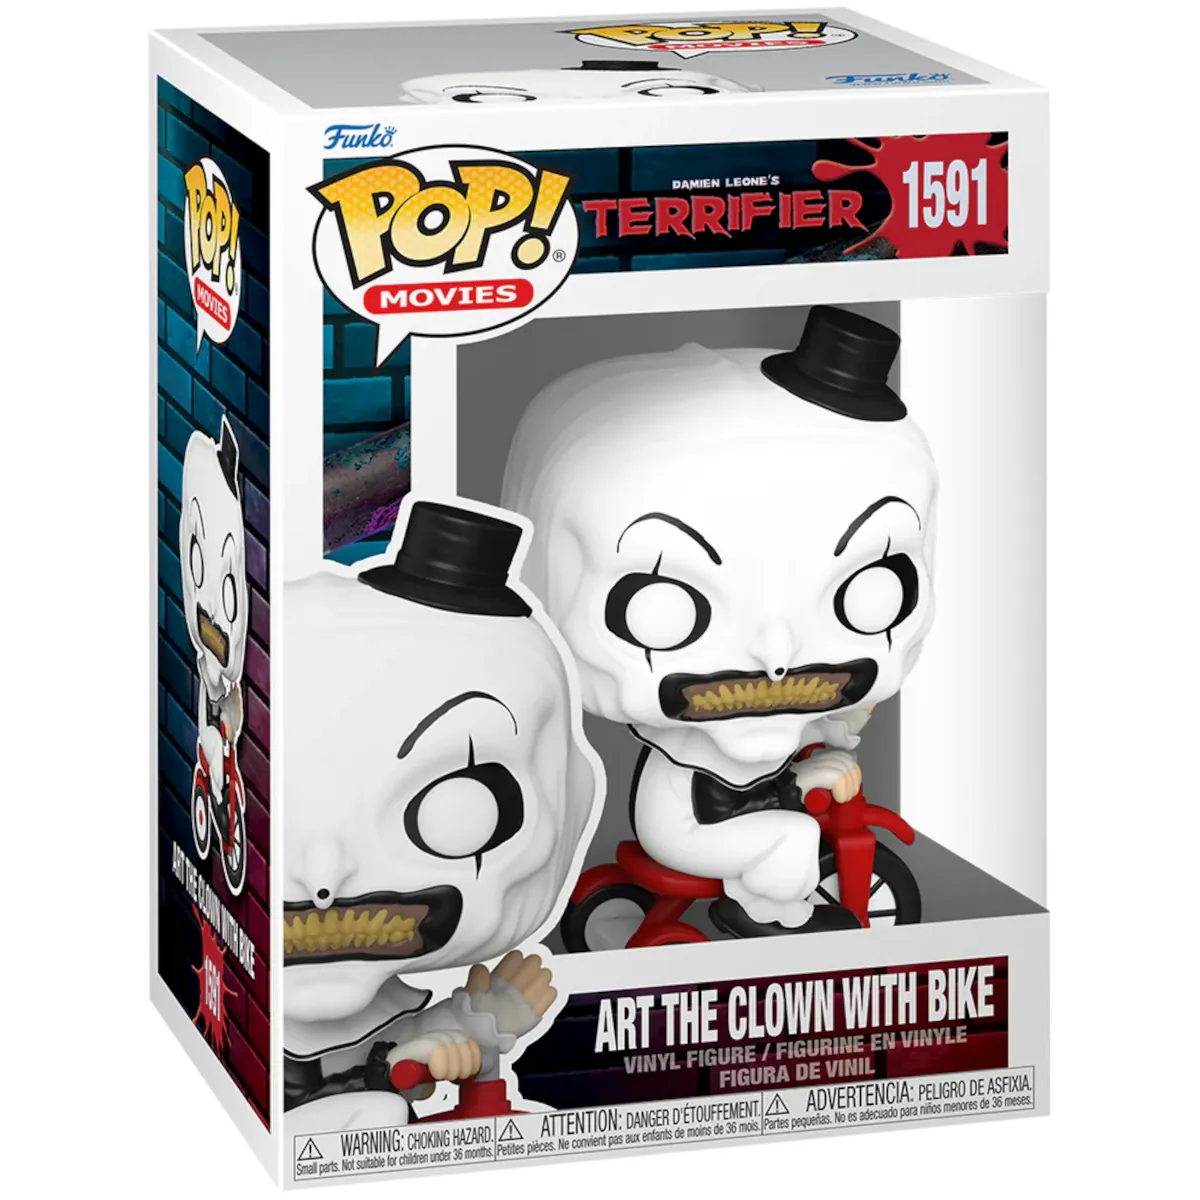 80706 Funko Pop! Movies - Terrifier - Art The Clown With Bike Collectable Vinyl Figure Box Front